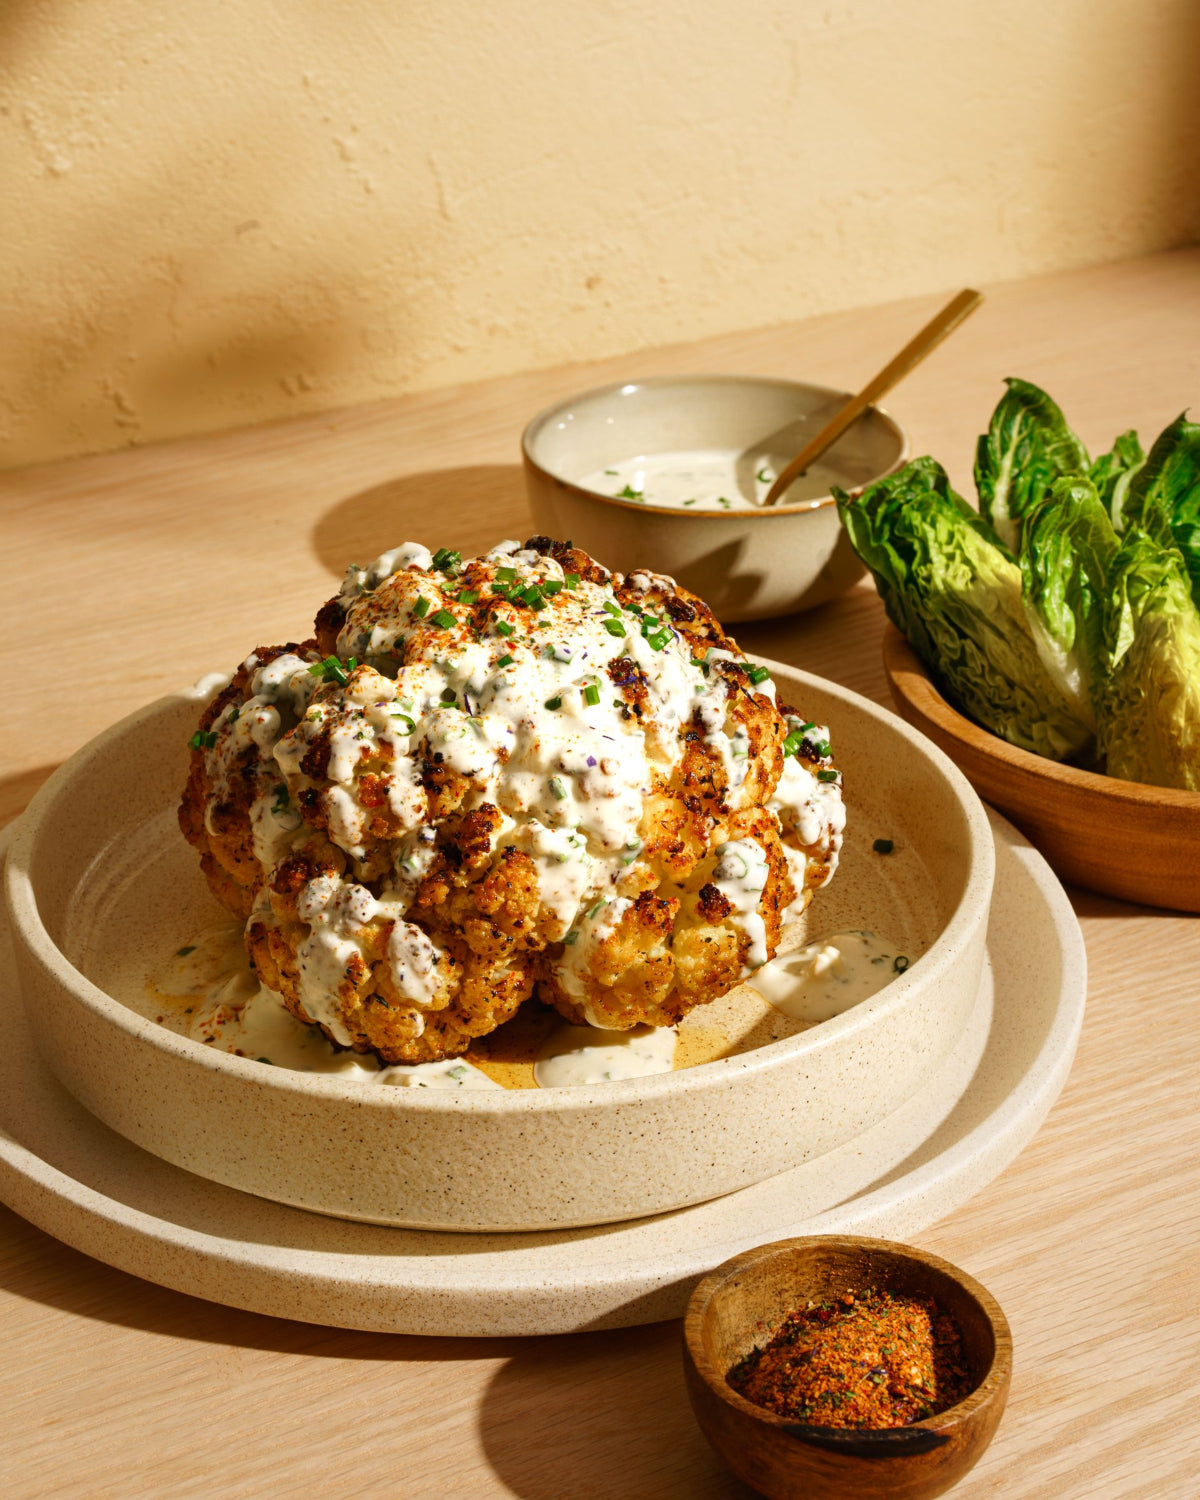 Bhutan Blossoms Whole Roasted Cauliflower with Blue Cheese and Buttermilk Dressing